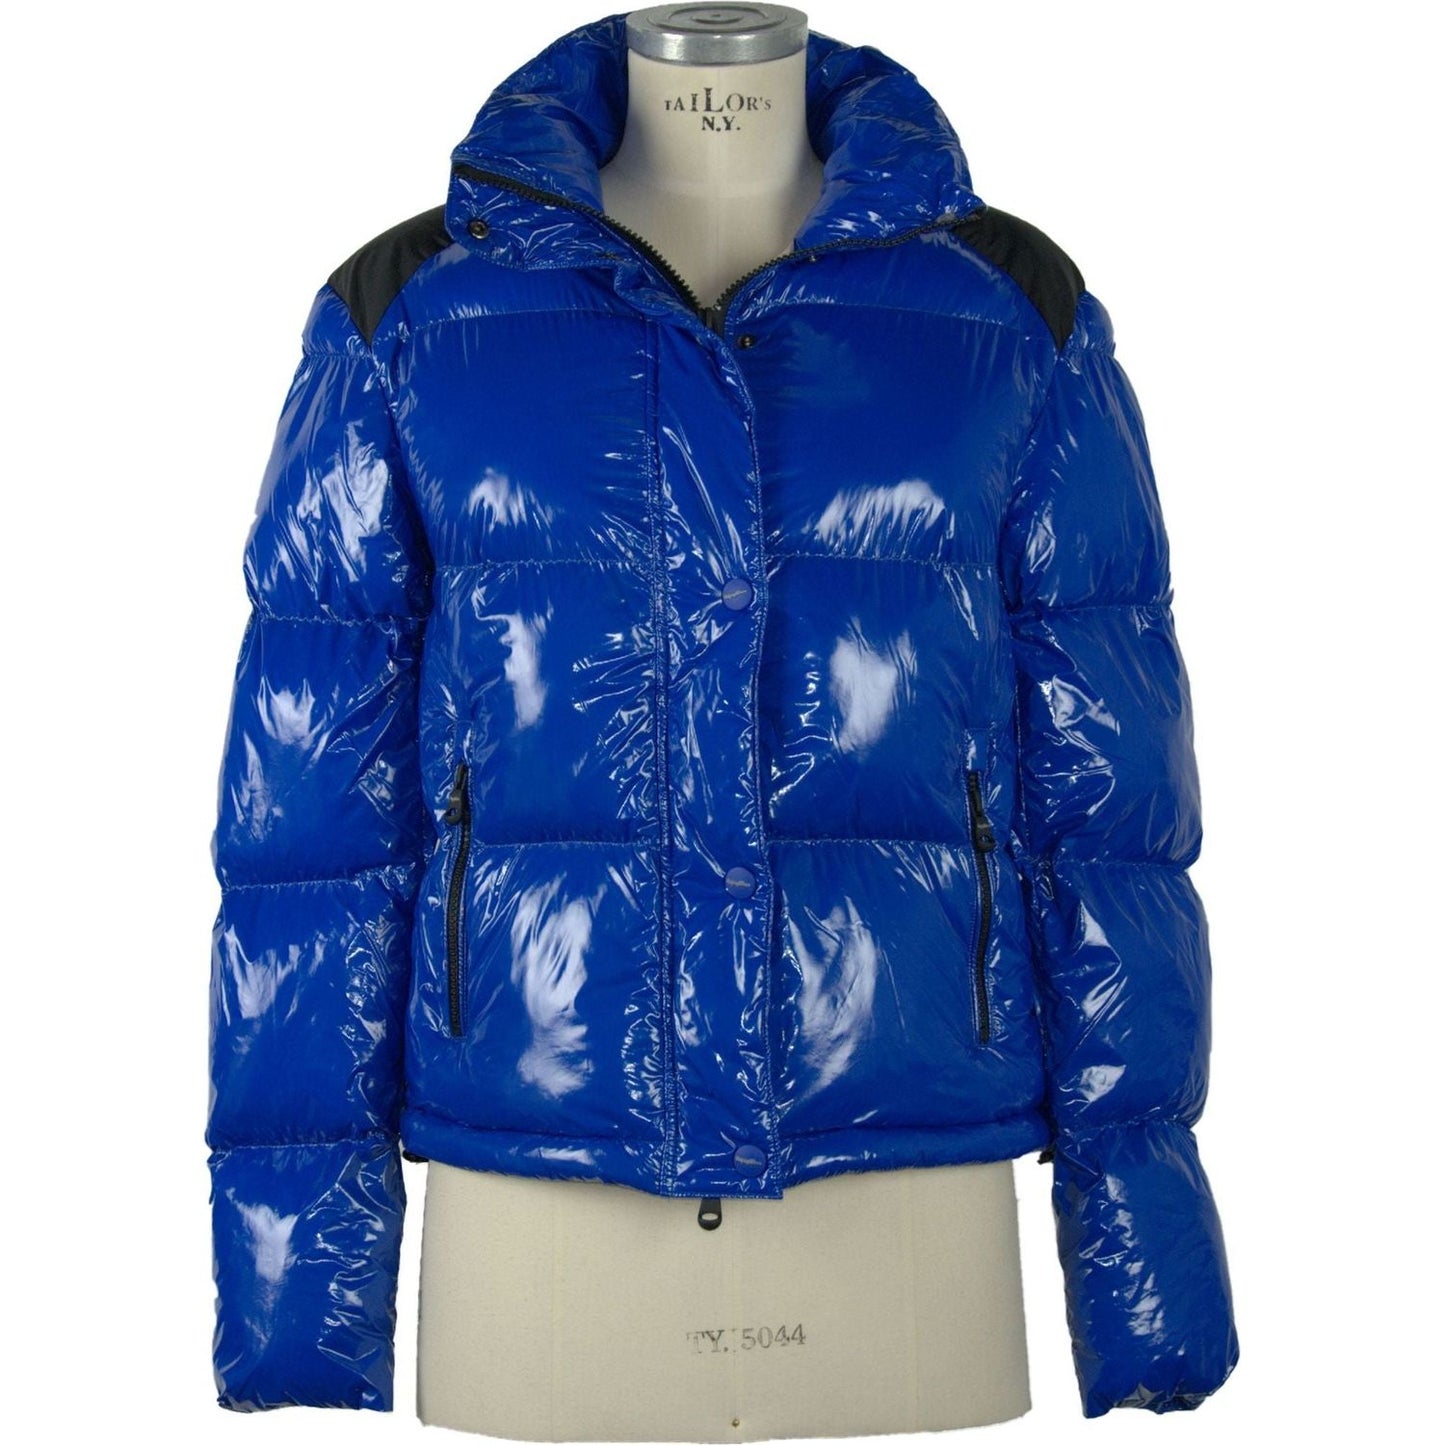 Refrigiwear Chic Blue Down Jacket with Eco-Friendly Flair blue-polyamide-jackets-coat-4 WOMAN COATS & JACKETS stock_product_image_857_803987963-38-4b0cce33-eaa.jpg